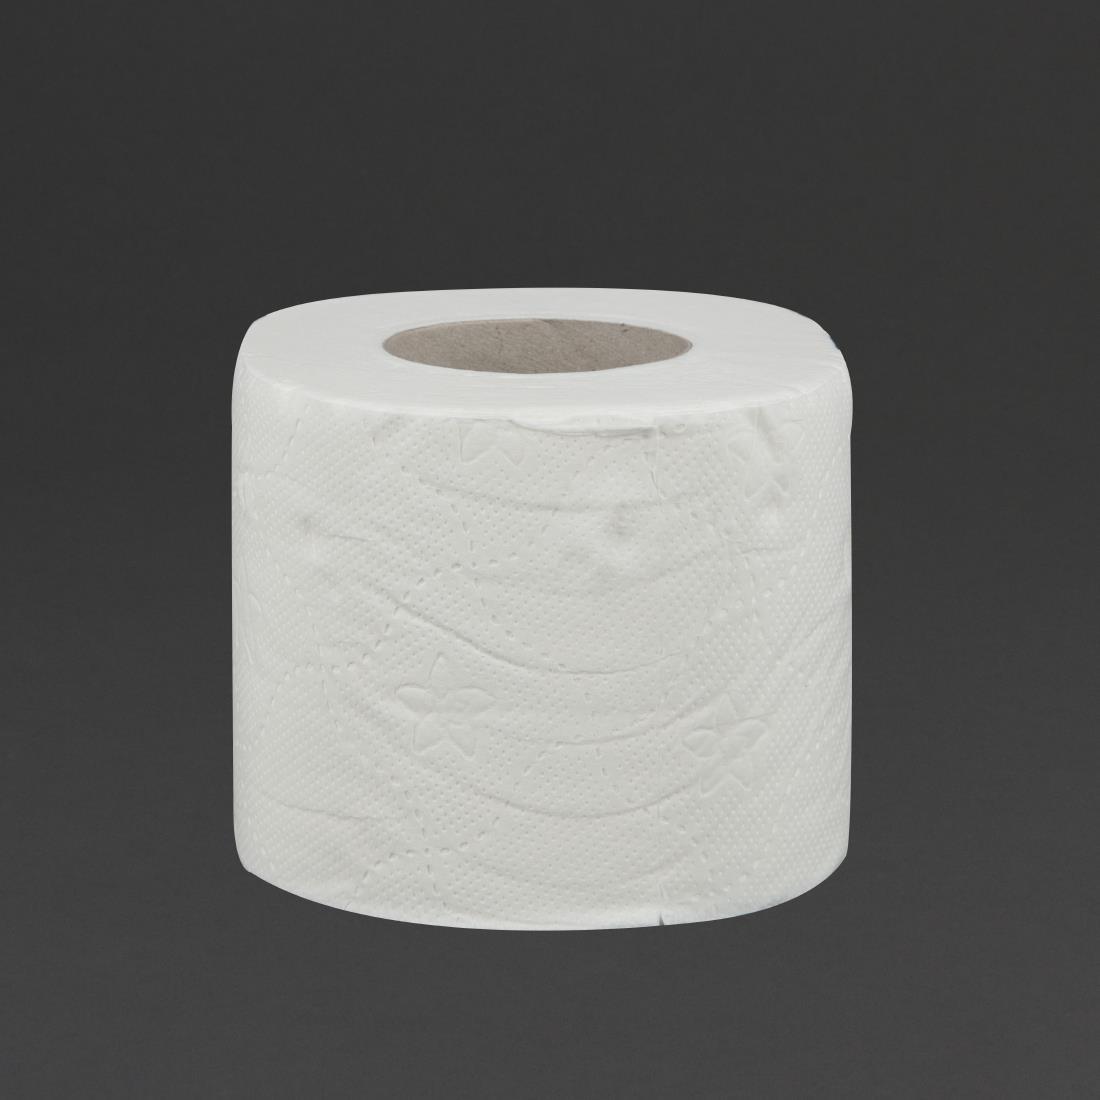 Jantex Toilet Rolls 2-ply (Pack of 36) - DL922  - 2